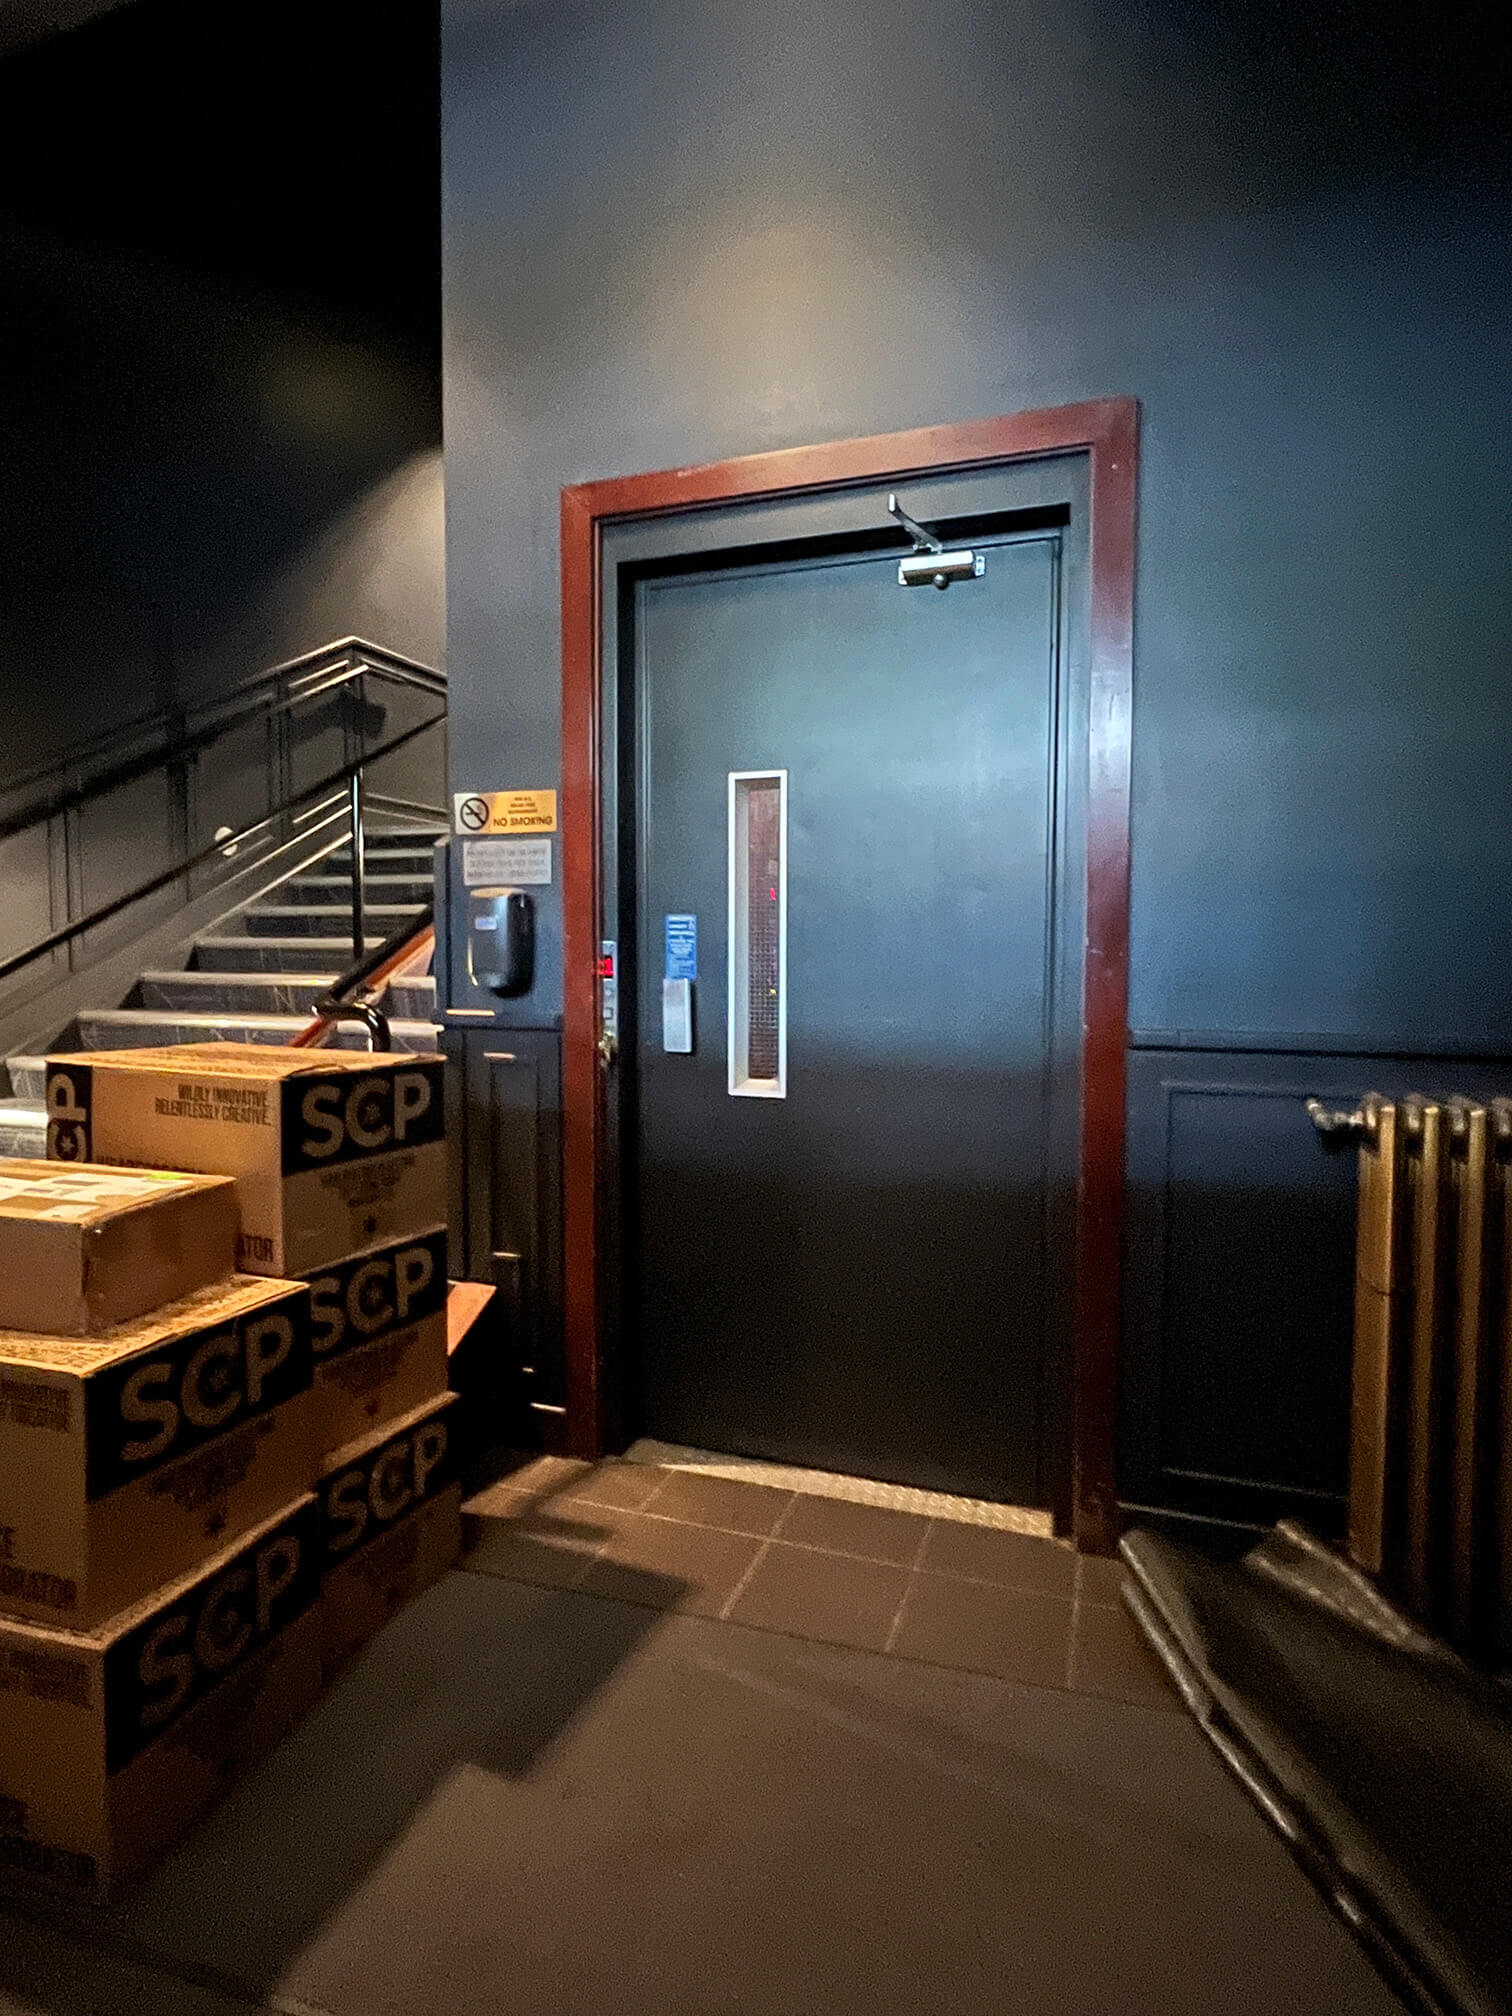 Exterior view of the platform lift on the first floor of the Commodore Ballroom.